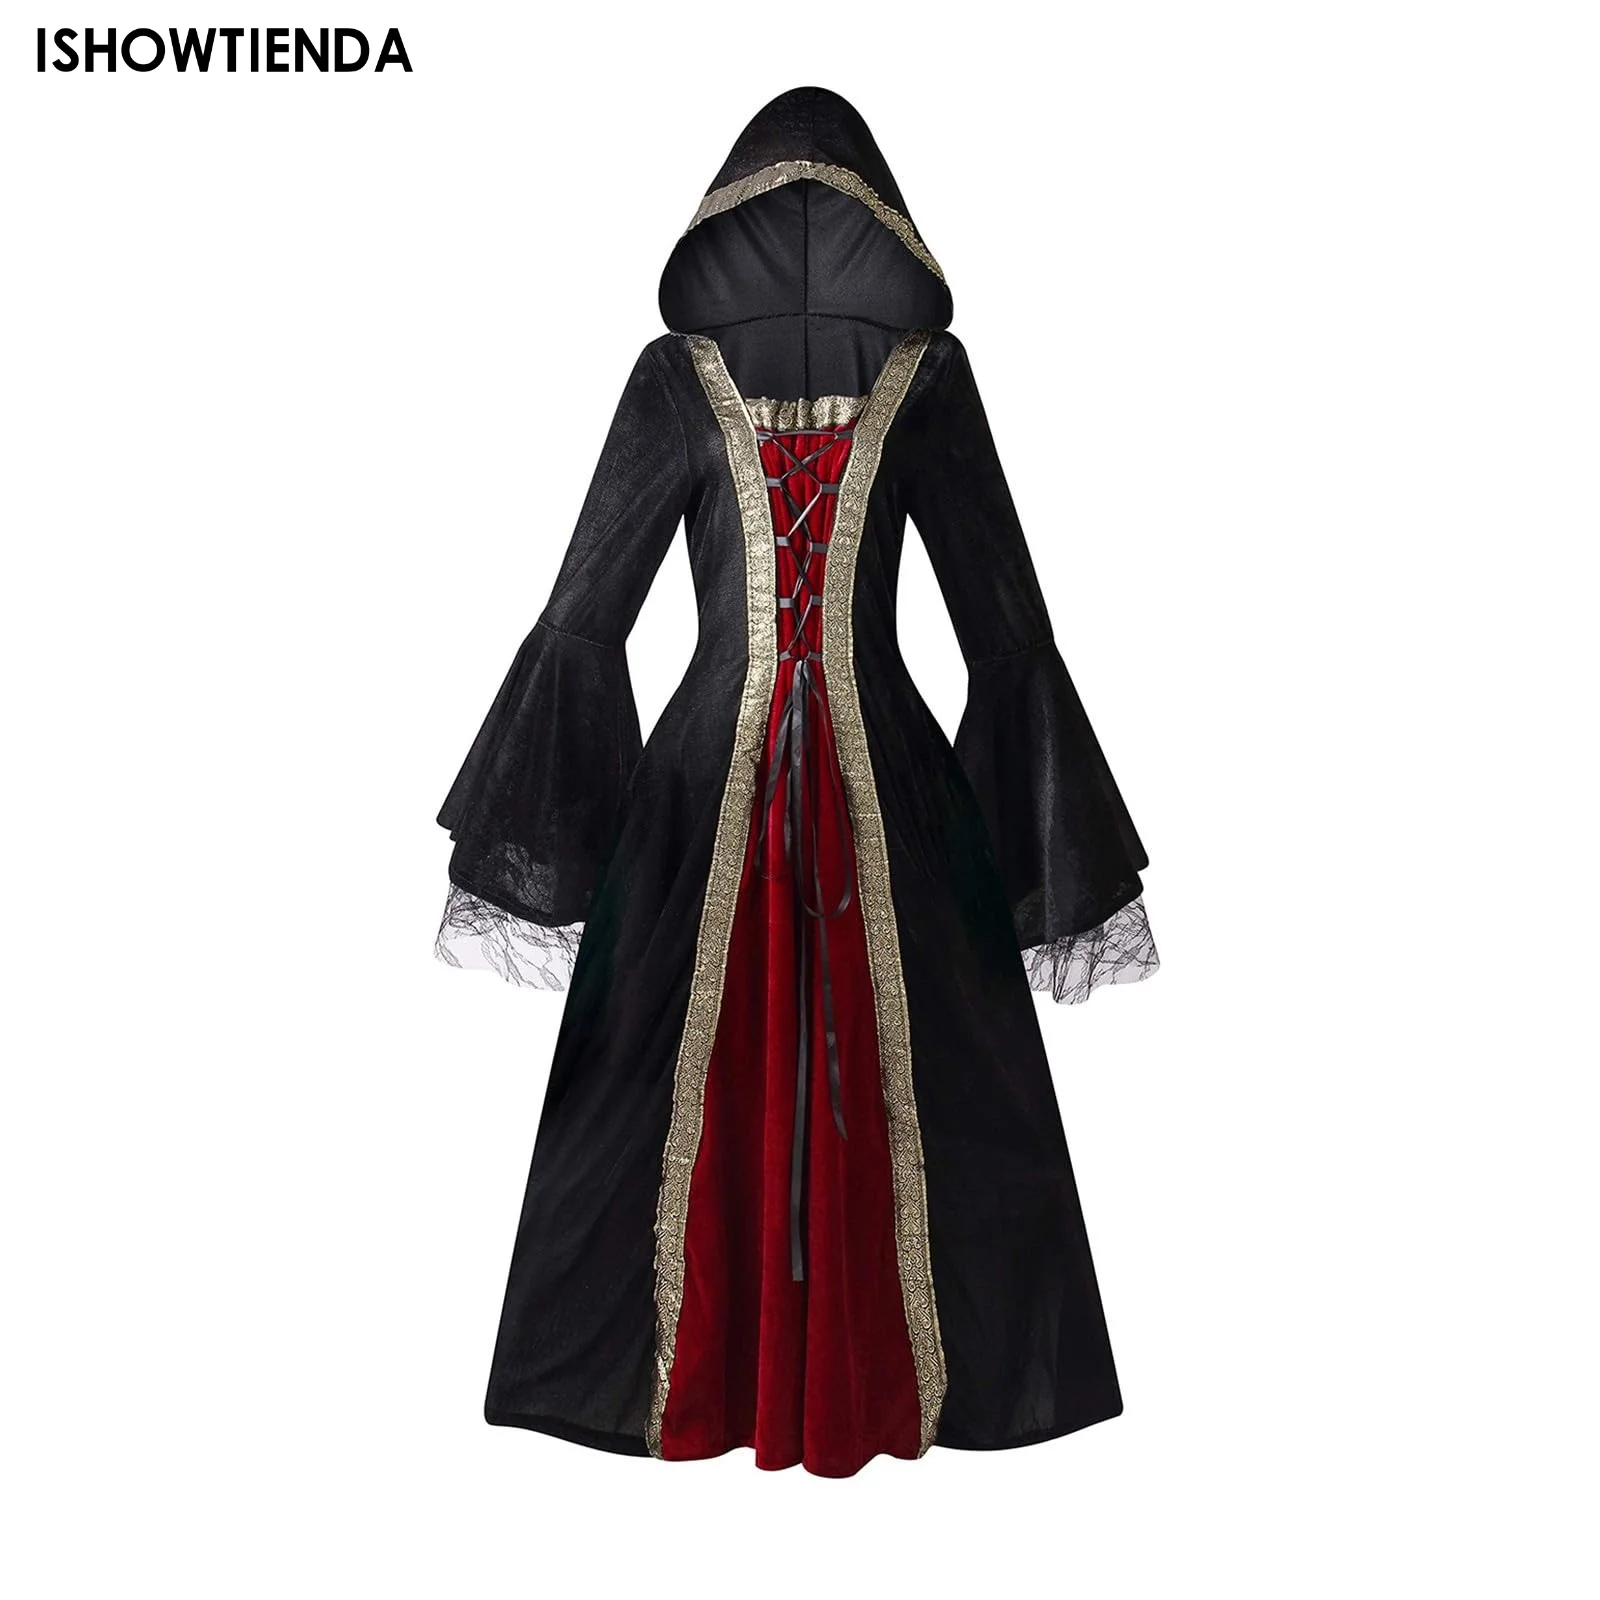 

European Palace Medieval Dress Vintage Victoria Queen Princess Hooded Cosplay Costume Party Dress Halloween Women Carnival Gowns